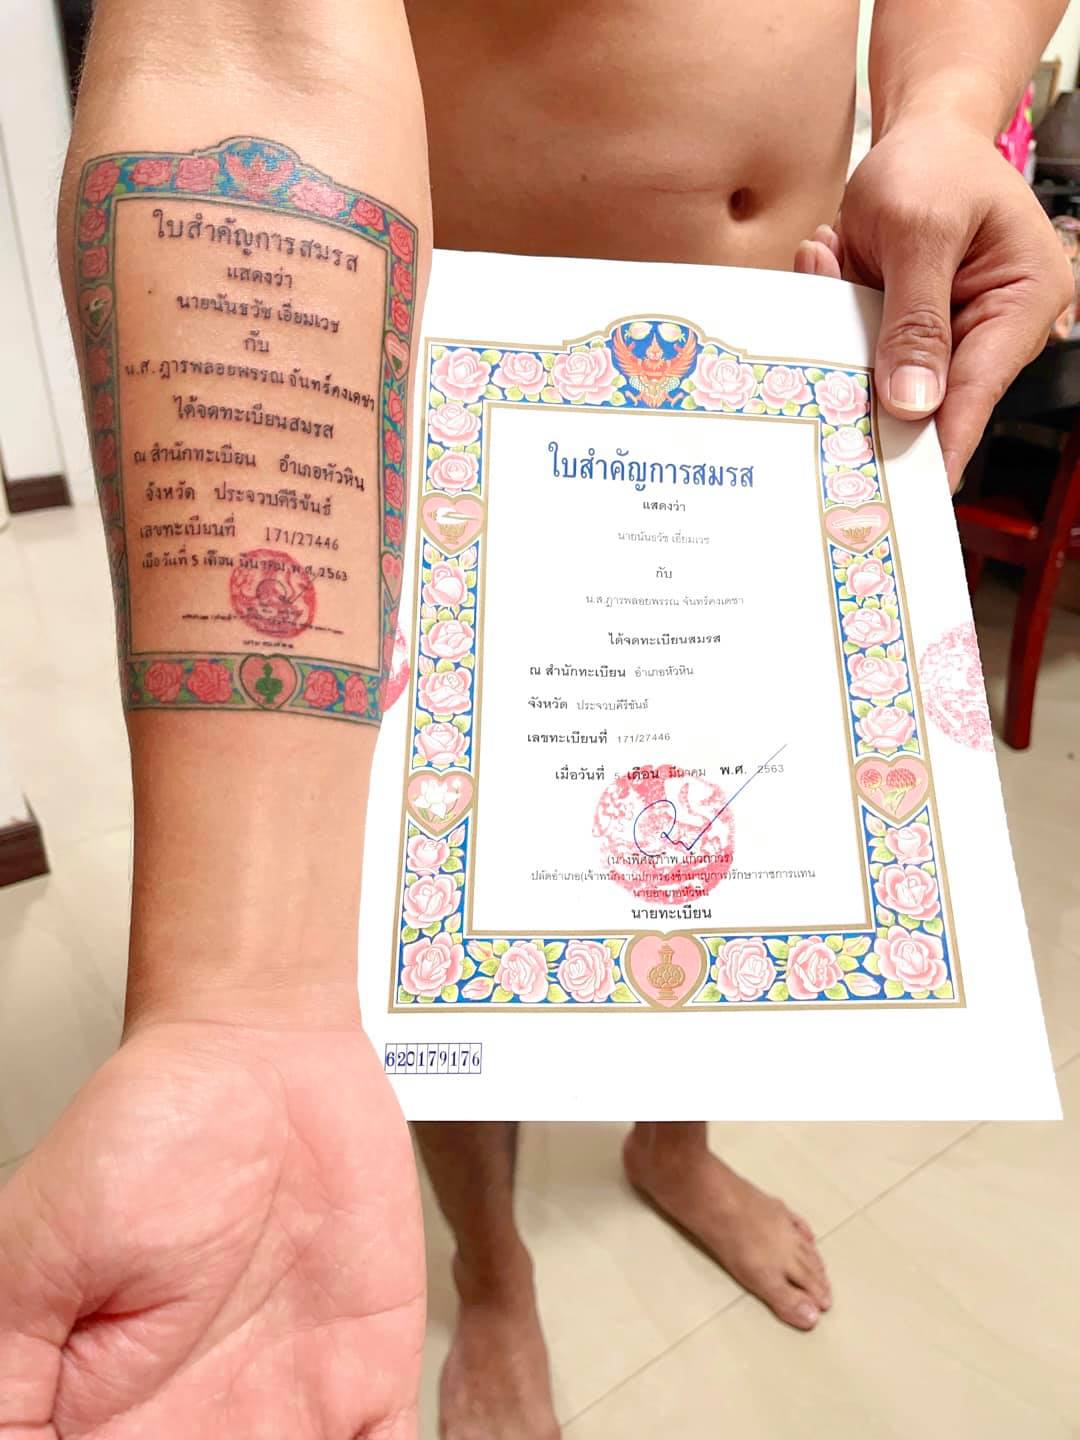 Man gets marriage certificate tattoo on his arm to surprise wife